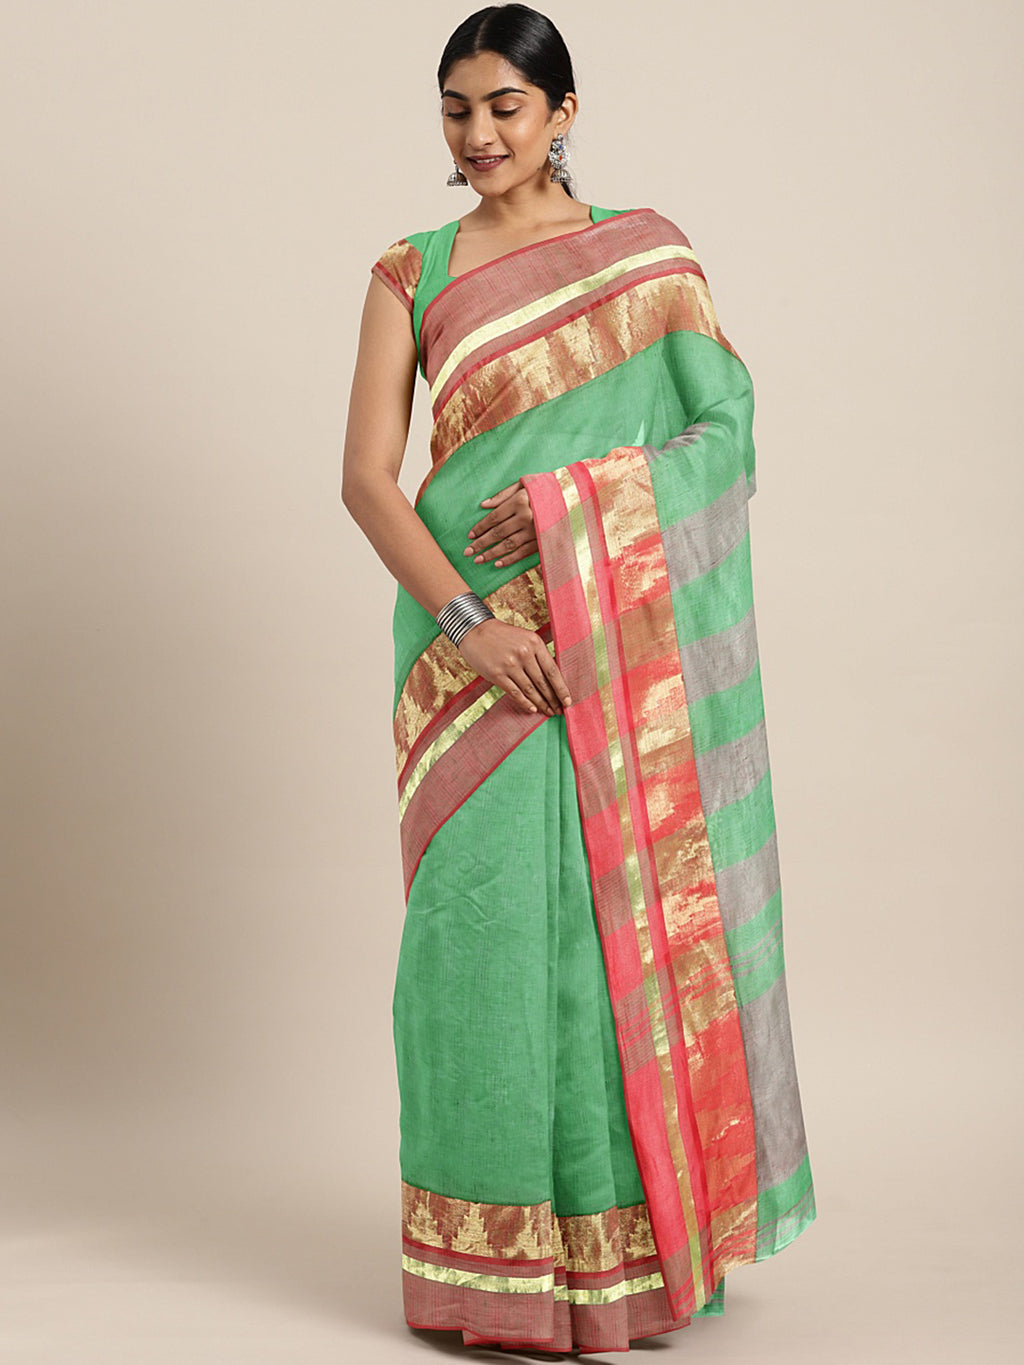 Green Tant Woven Design Saree Without Blouse Piece DUTASA042 DUTASA042-Saree-Kalakari India-DUTASA042-Geographical Indication, Hand Crafted, Heritage Prints, Natural Dyes, Sarees, Silk Cotton, Sustainable Fabrics, Taant, Tant, West Bengal, Woven-[Linen,Ethnic,wear,Fashionista,Handloom,Handicraft,Indigo,blockprint,block,print,Cotton,Chanderi,Blue, latest,classy,party,bollywood,trendy,summer,style,traditional,formal,elegant,unique,style,hand,block,print, dabu,booti,gift,present,glamorous,affordabl